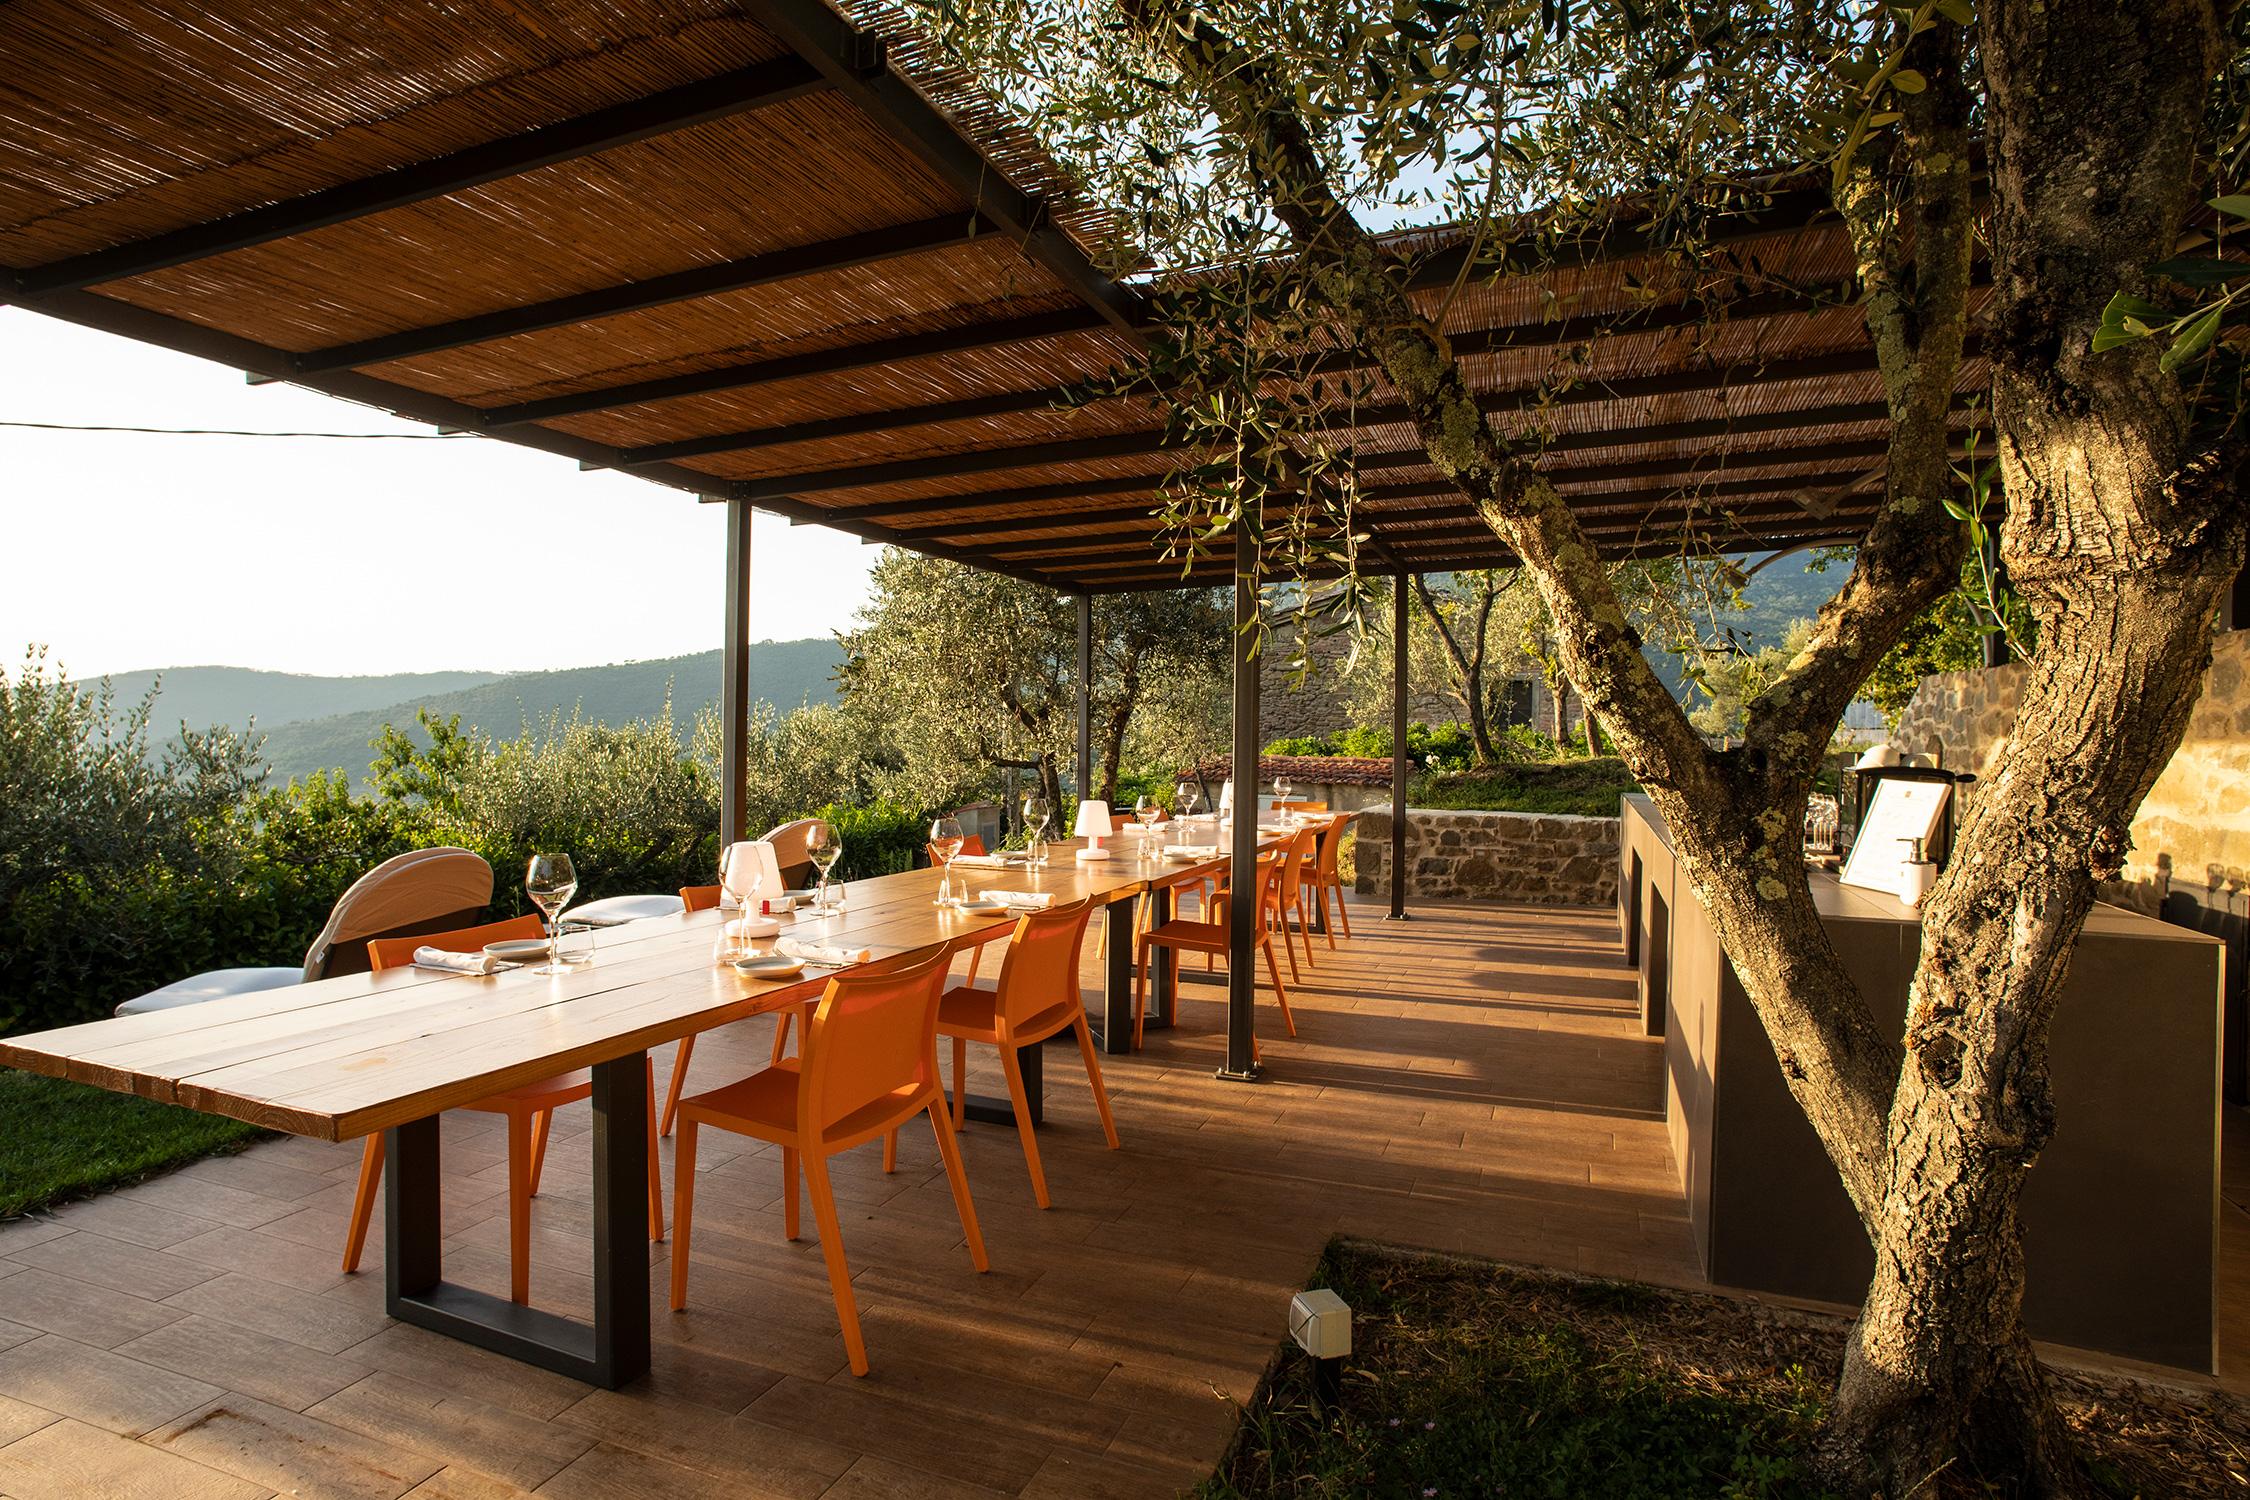 Organika | Restaurant with panoramic views and outdoor spaces in Corton, Tuscany